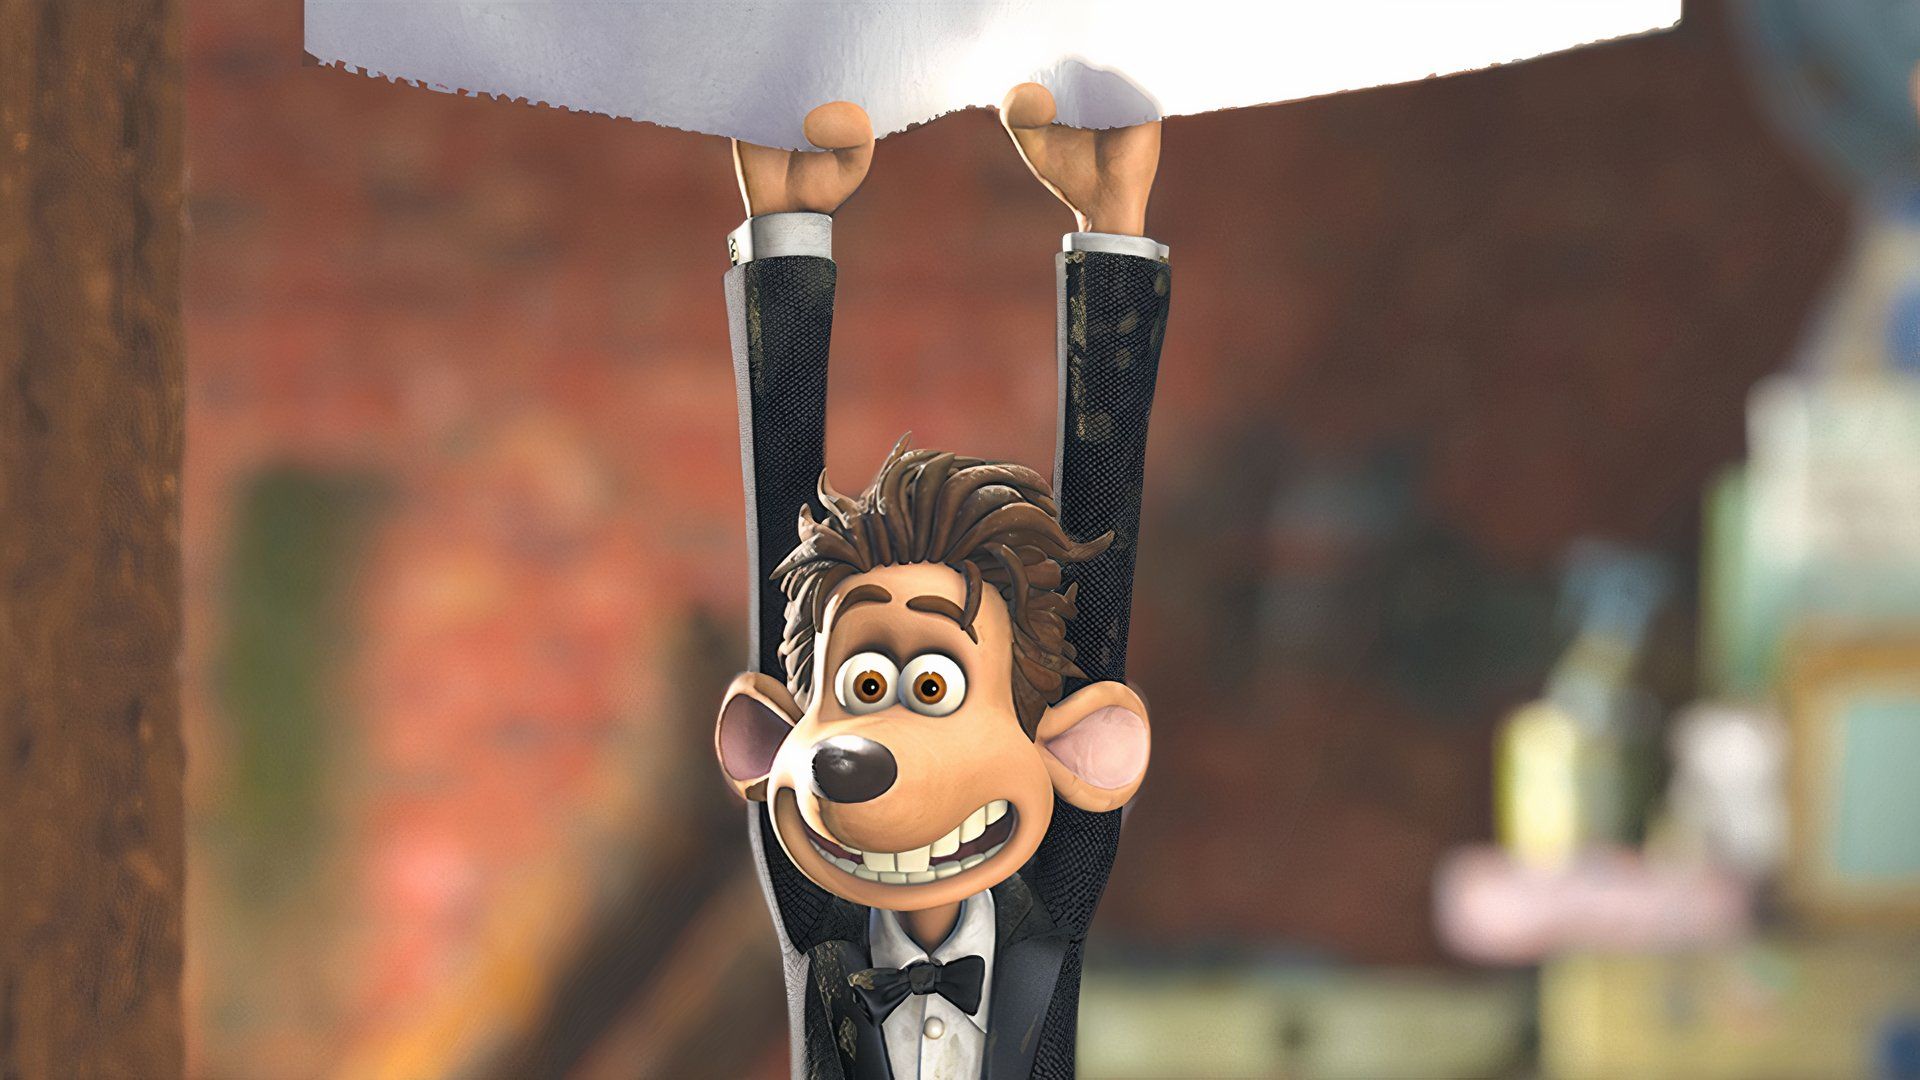 Roddy dangles from a sheet in Flushed Away